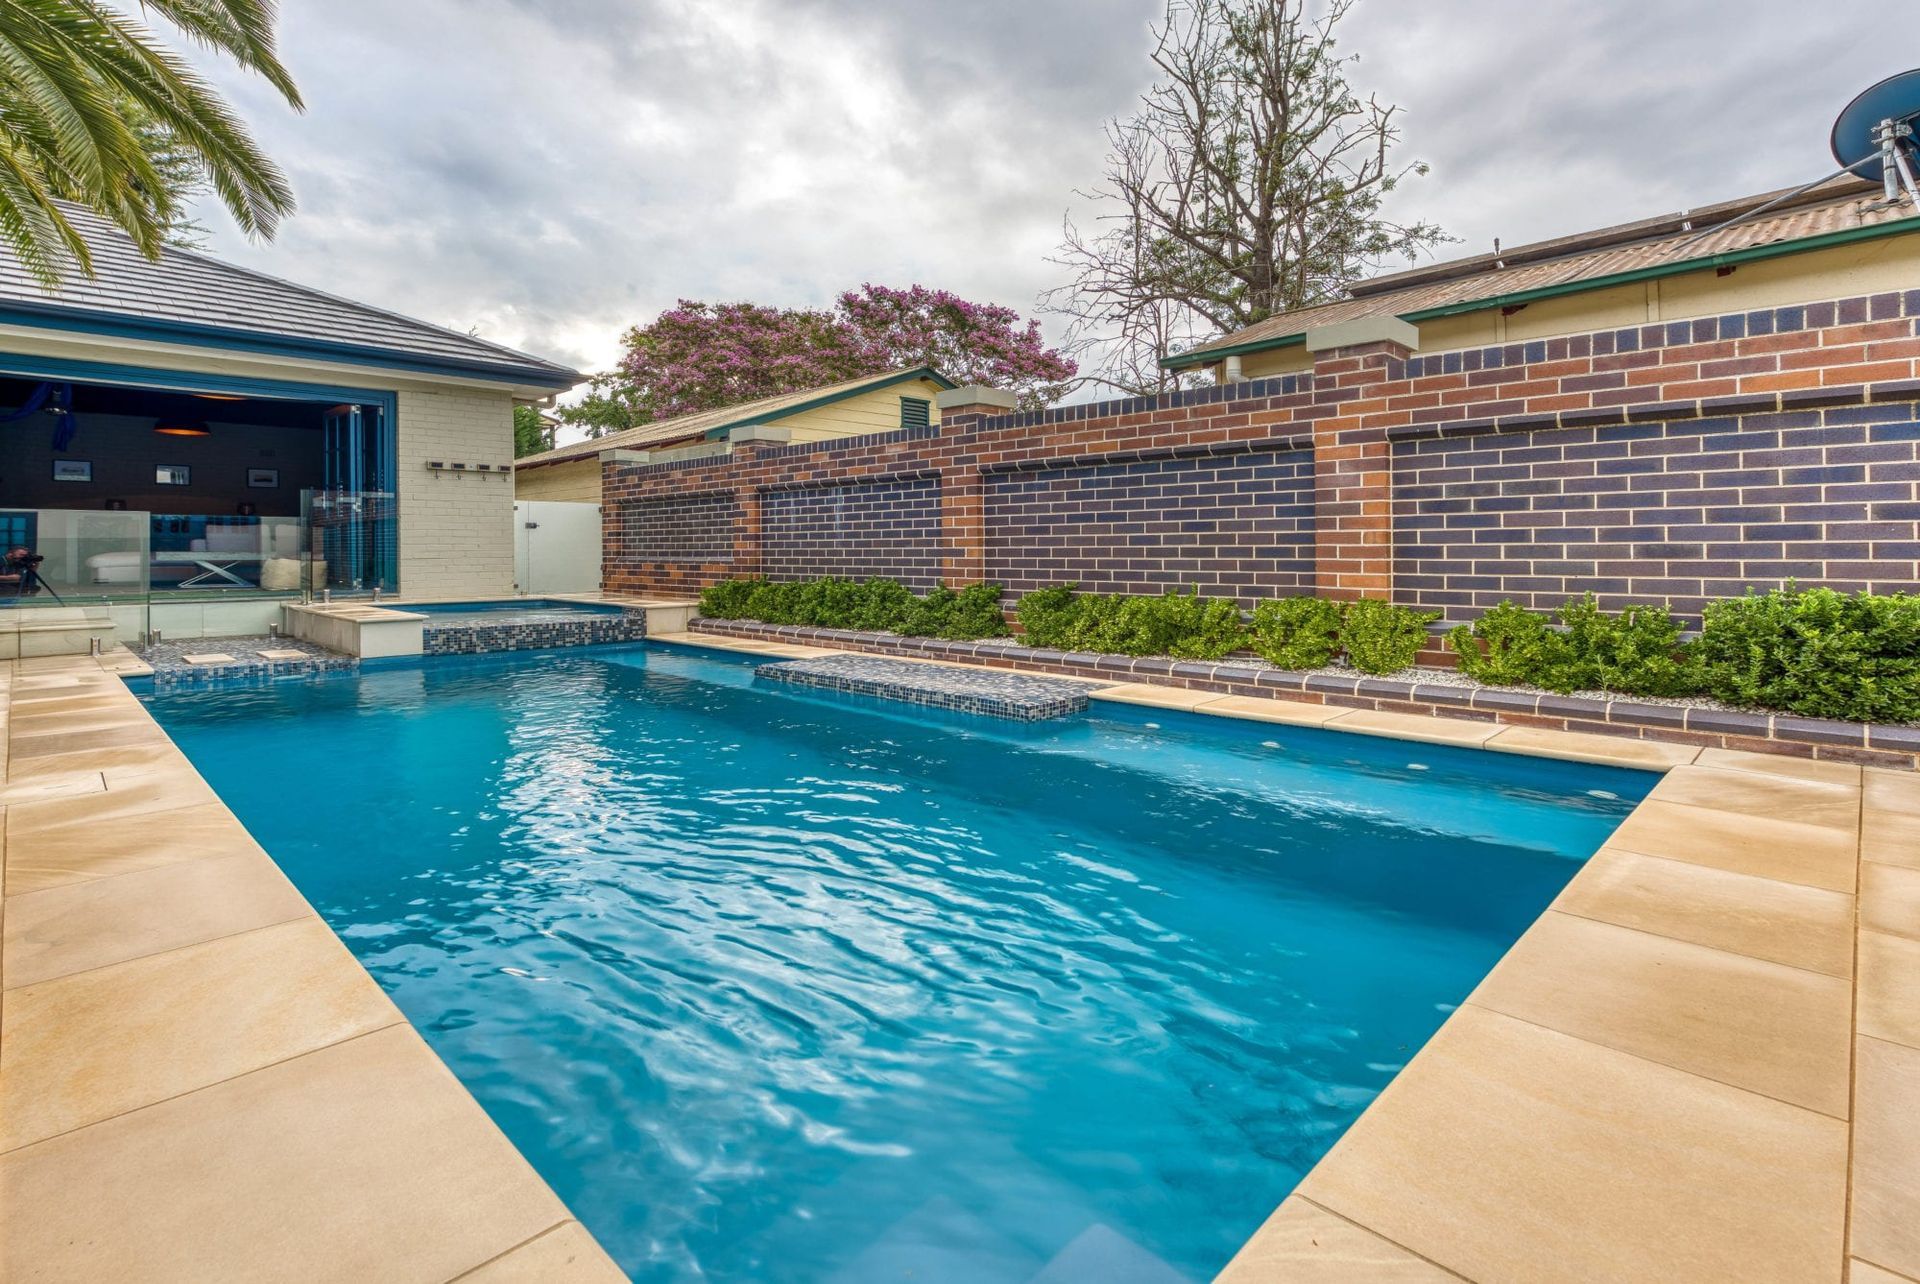 Classic Pool design by Masterbuilt Pools in Kempsey NSW area